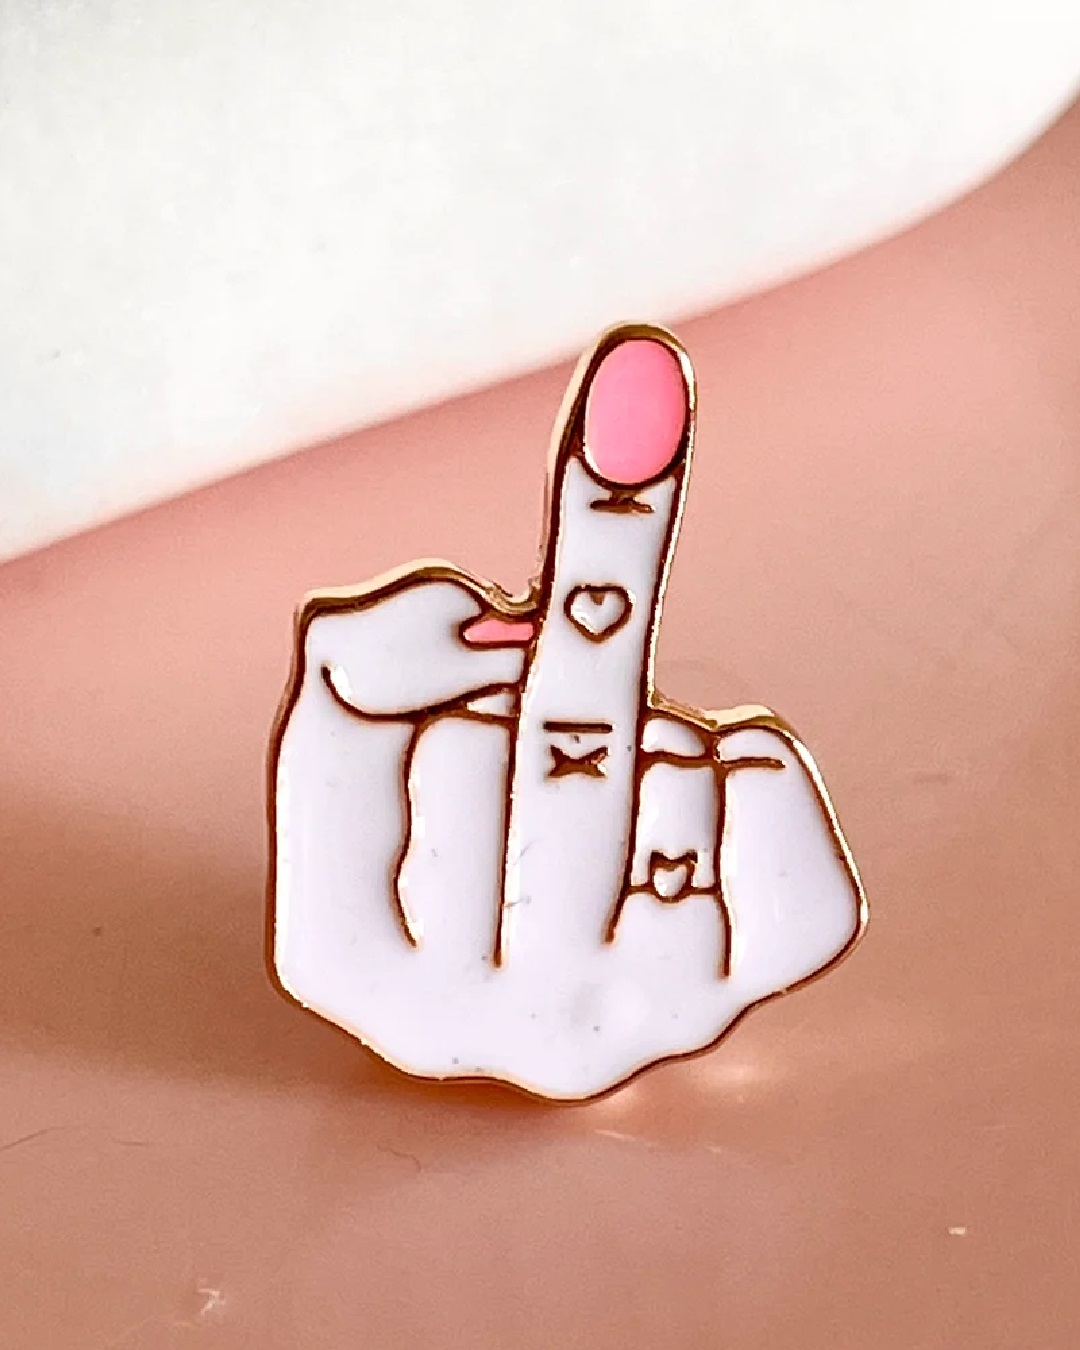 Middle finger pink pin